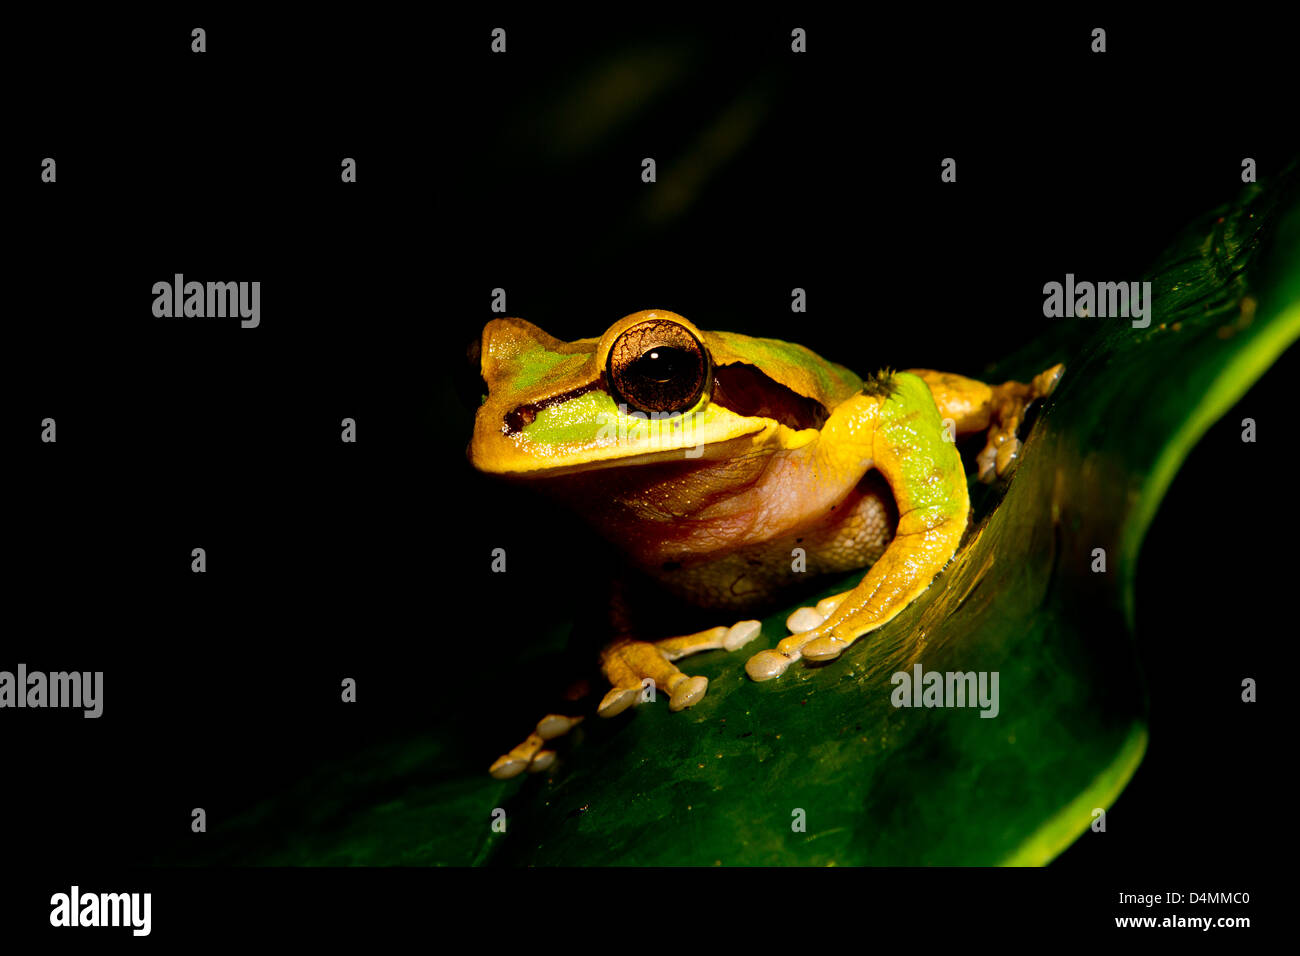 Spotted brown frog on a leaf with black background Stock Photo